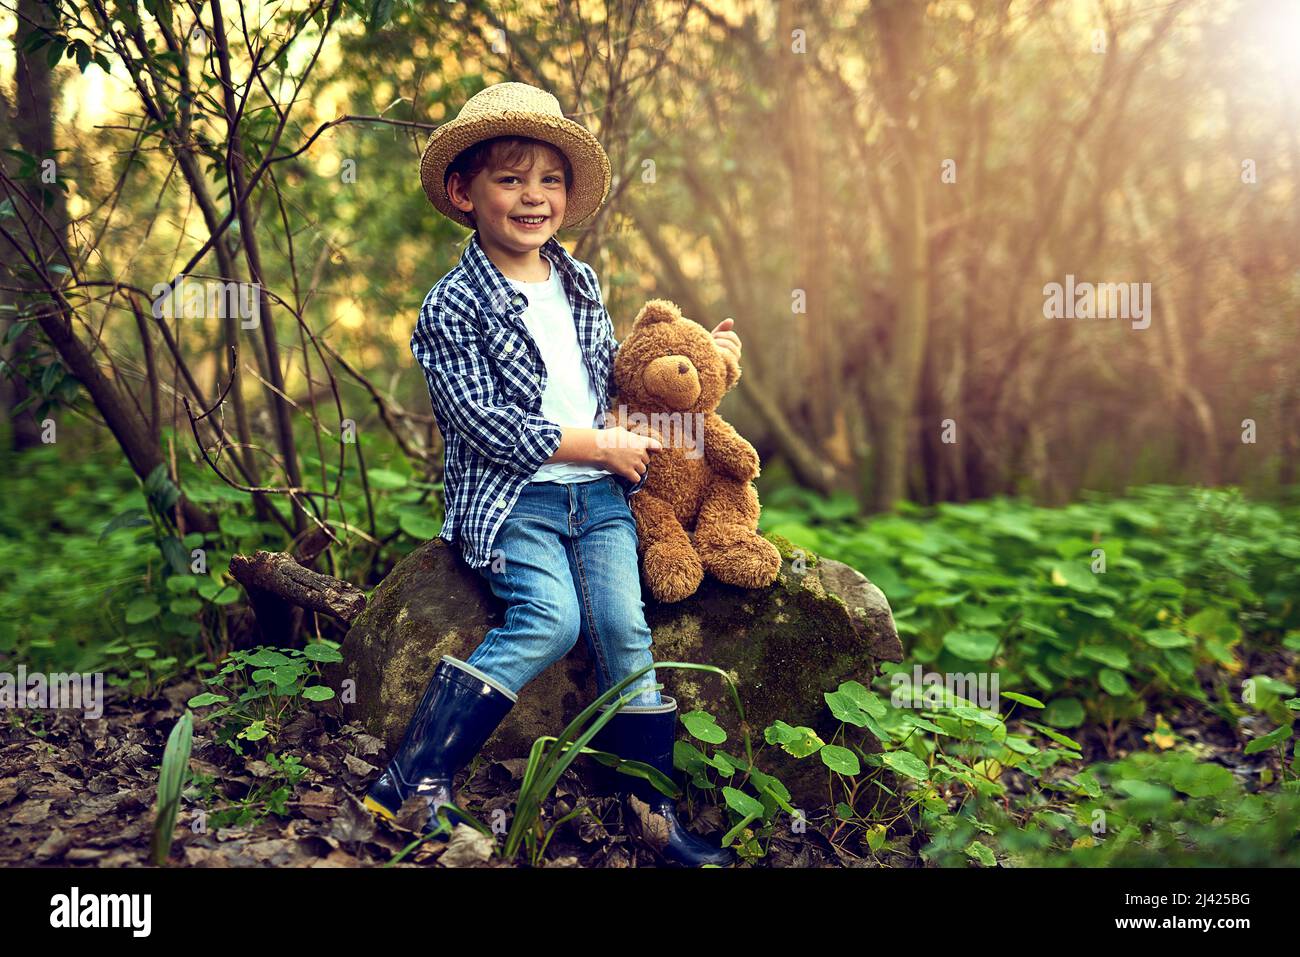 Theres no better companion in the woods. Shot of a little boy sitting in the forest with his teddy bear. Stock Photo